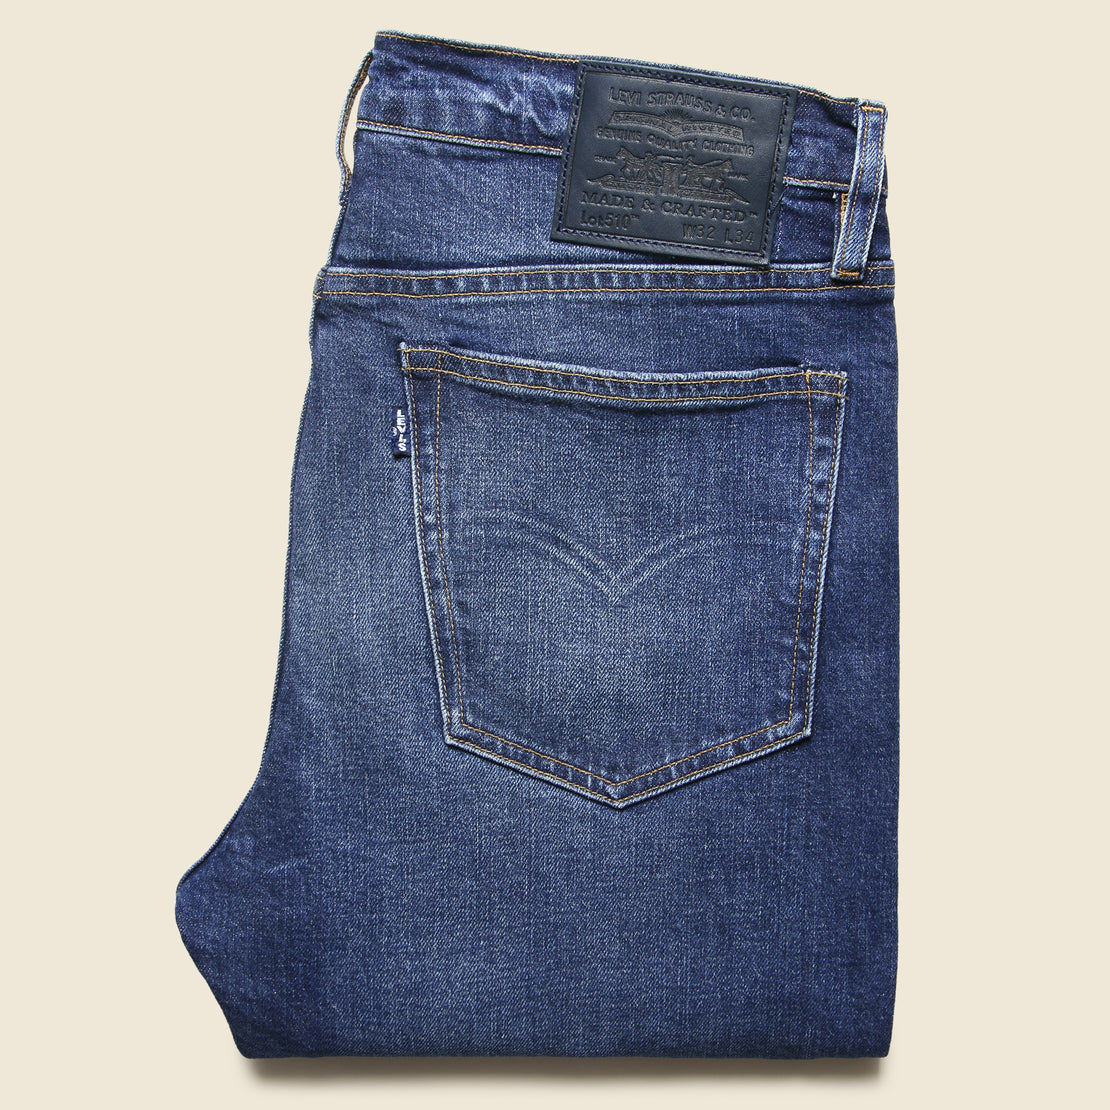 510 Jean - Aylin - Levis Made & Crafted - STAG Provisions - Pants - Denim